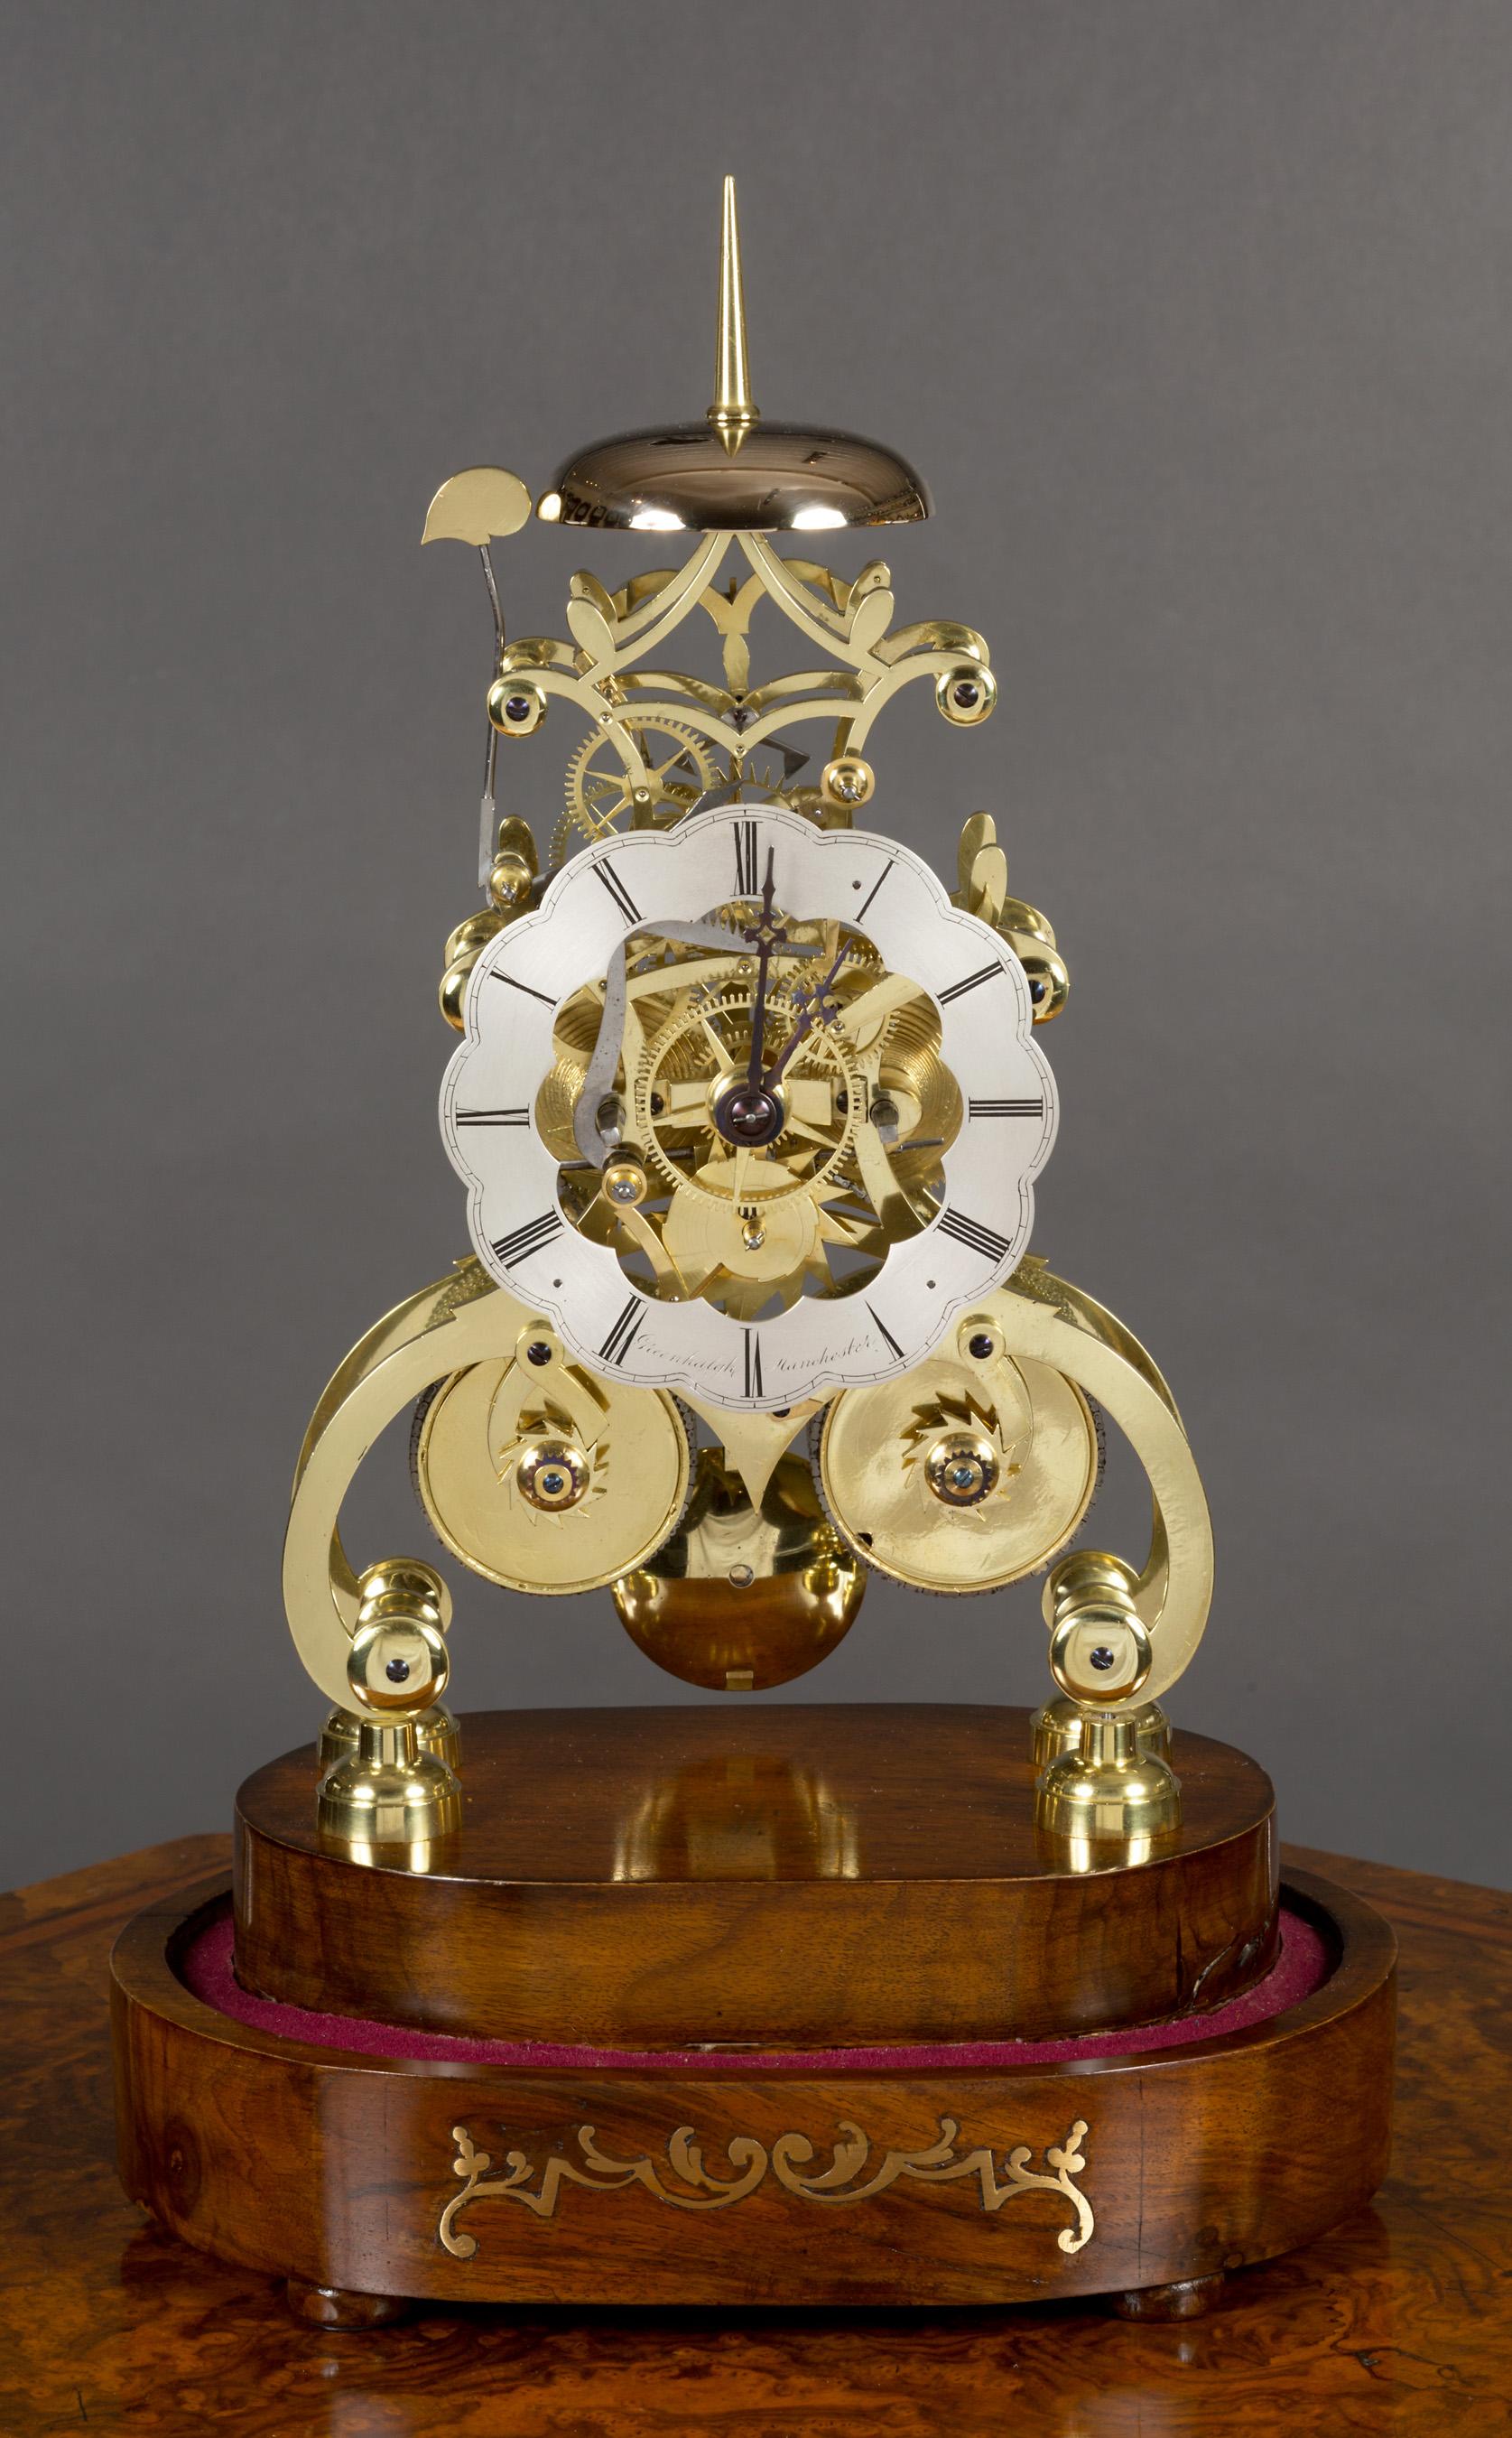 A fine Victorian striking skeleton clock.

Scroll brass frame with heavy plates and six turned, tapered pillars uniting the movement, standing on raised brass feet and resting on a stepped walnut base with brass inlay.

Scalloped, silvered dial